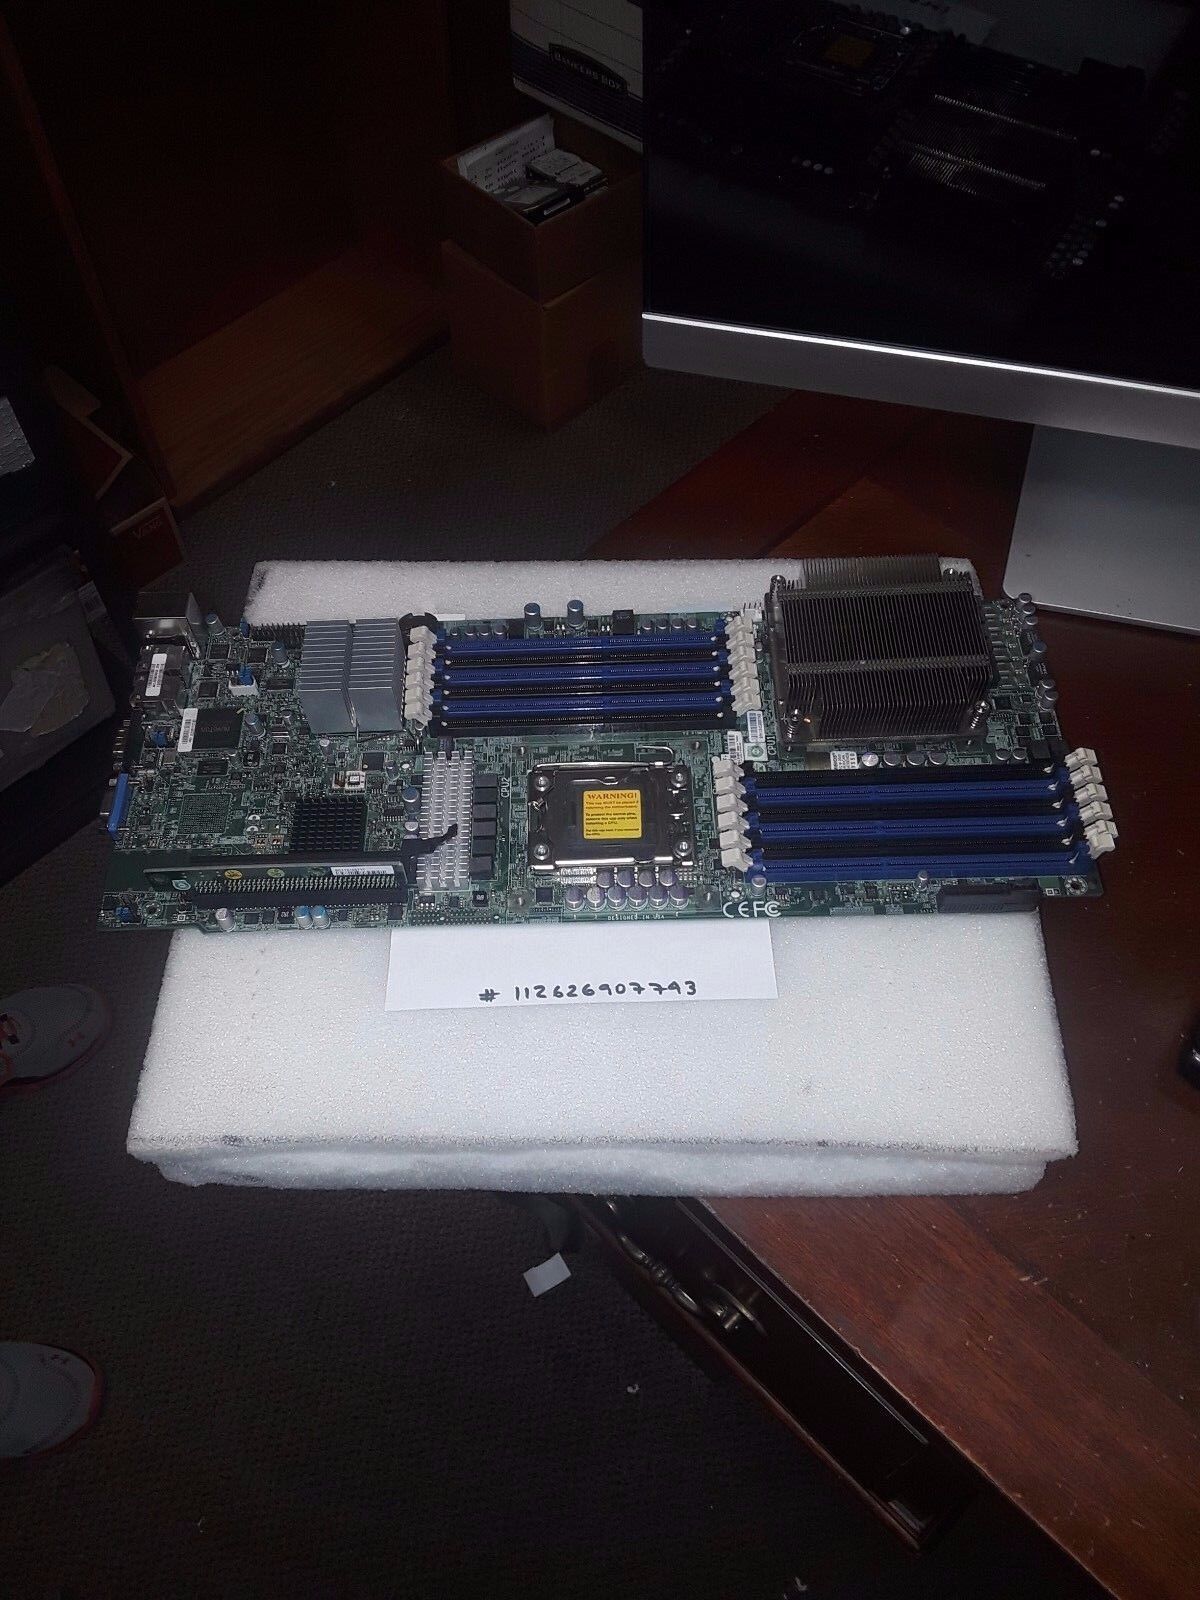 SUPERMICRO 2U FAT TWIN 6026TT-HDTRF 2 NODE X8DTT-HF+ WITH CPU INLUDED 1-SLBV3